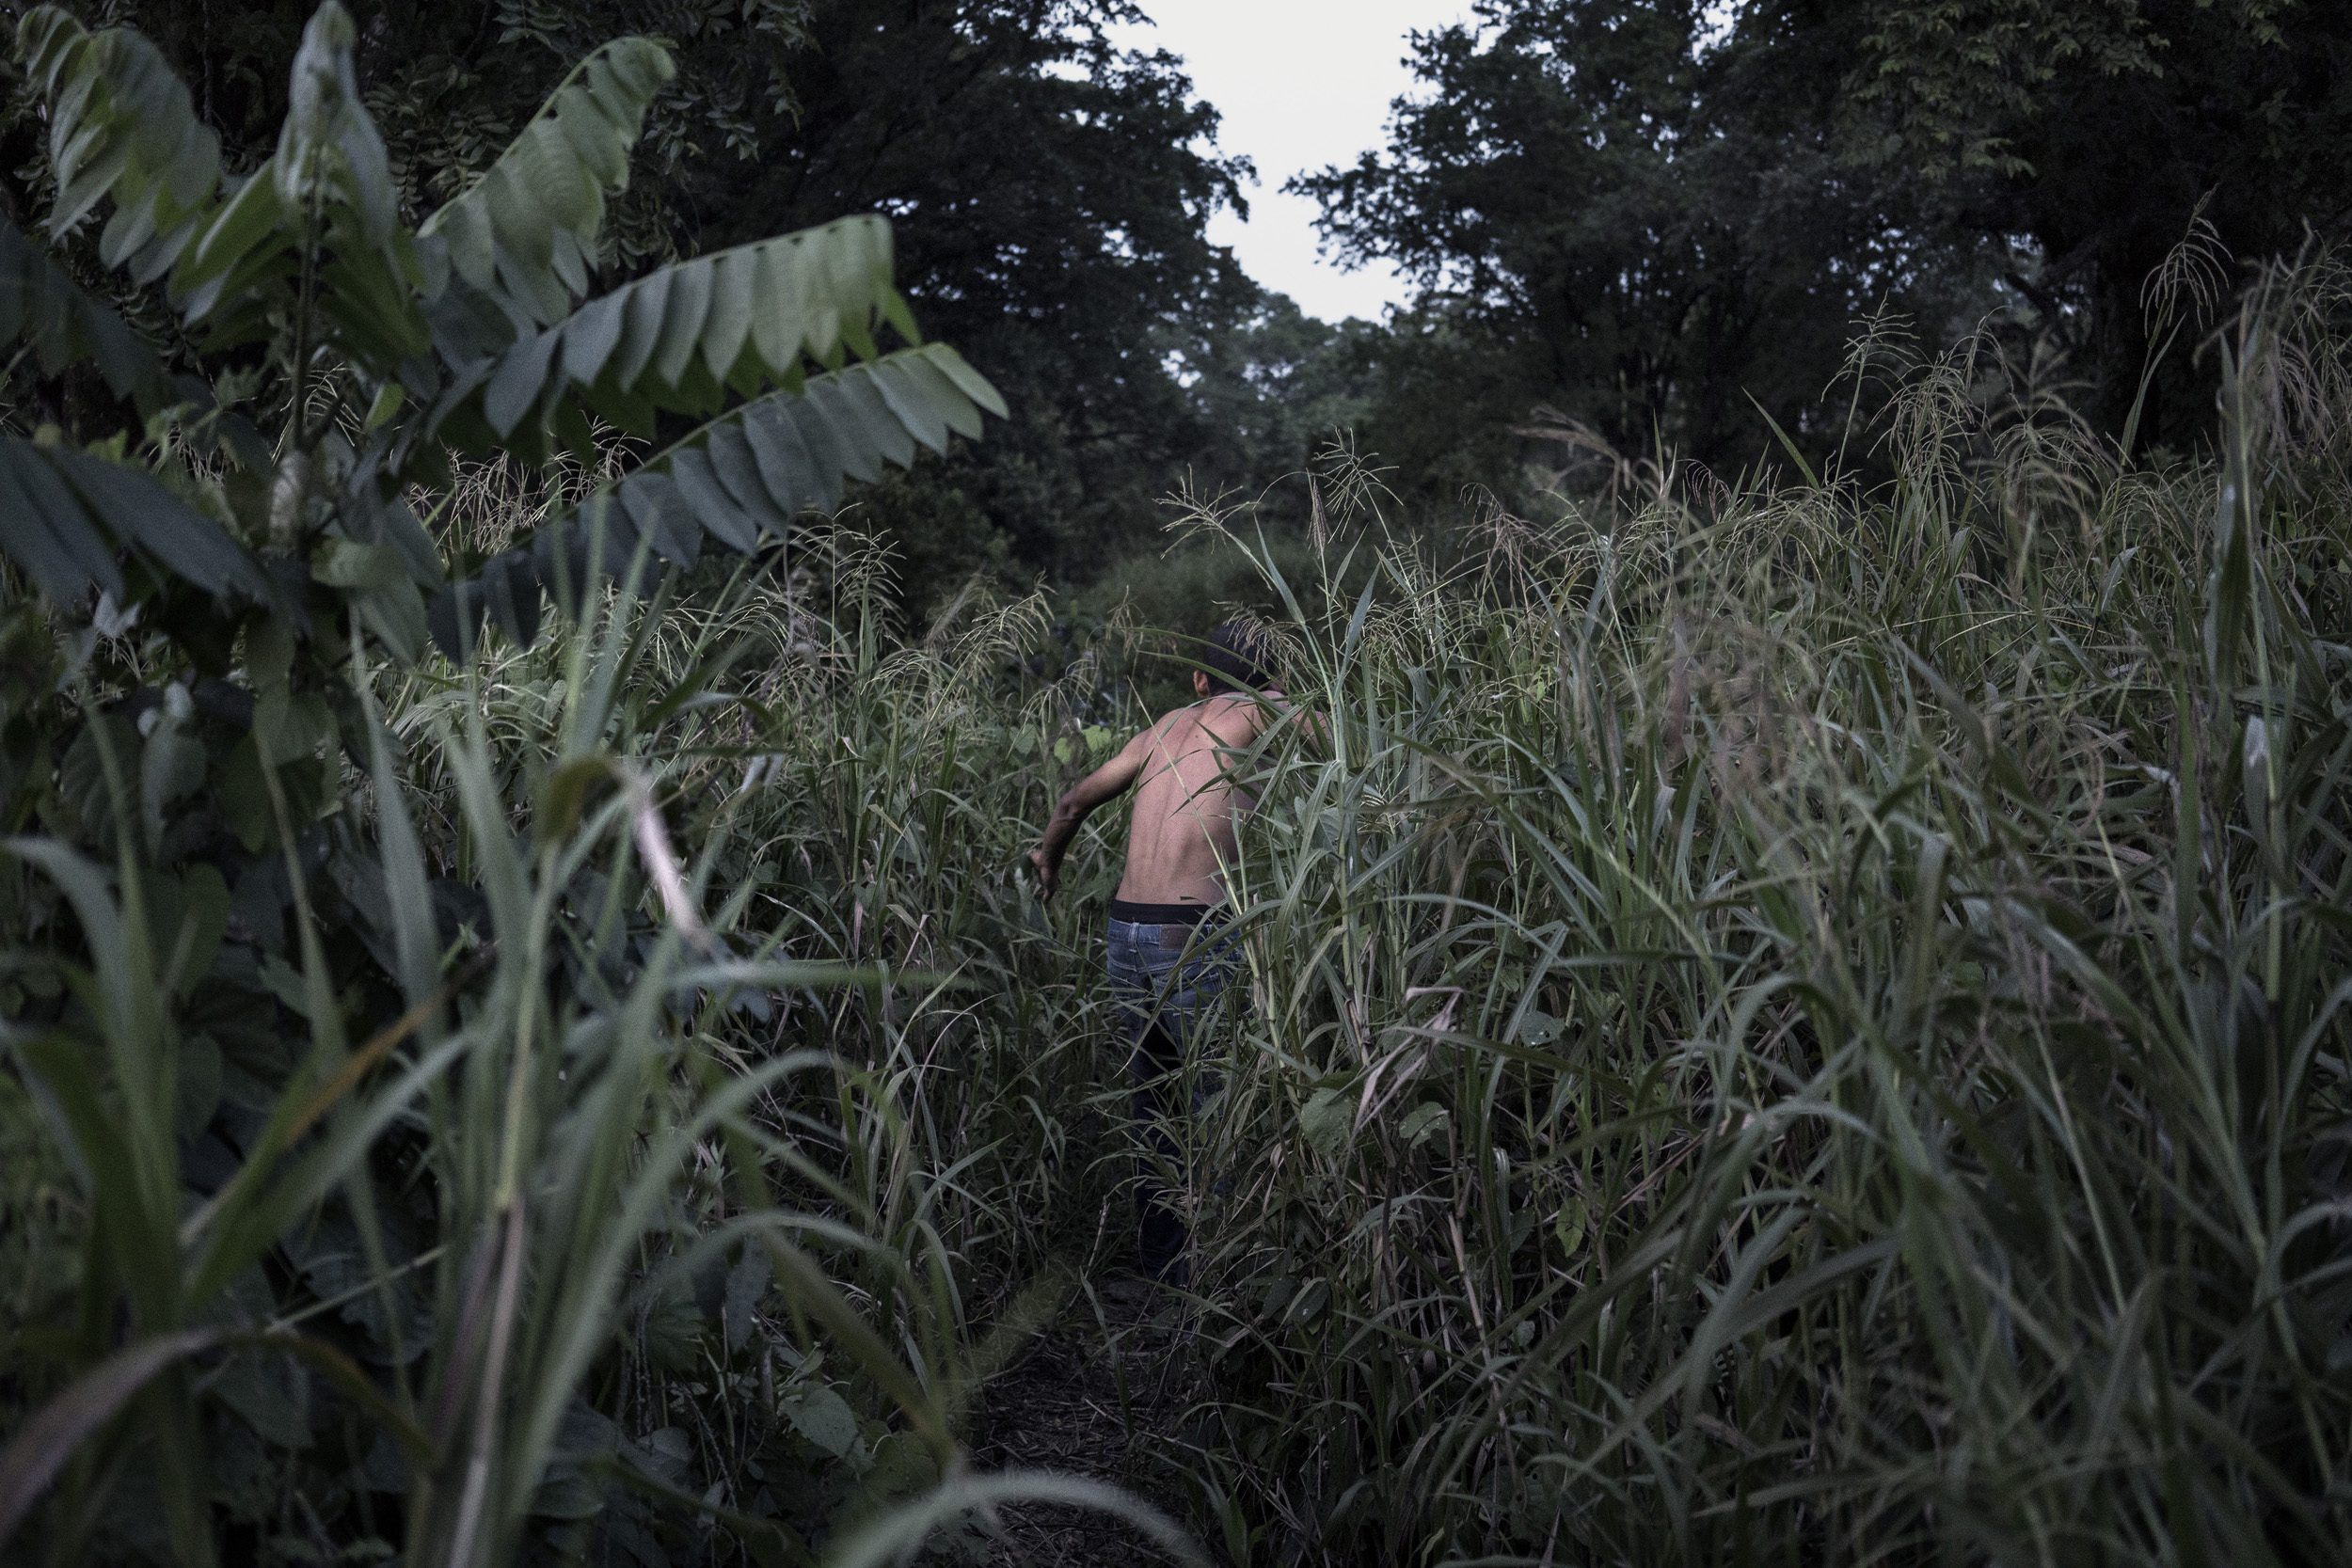 A Honduran migrant walking along a path to reach the Mexican city of Tenosique after illegally crossing the Guatemala border. This is the first leg of their long and dangerous journey north to the U.S.; according to local organizations there are approximately 20,000 migrants who, along this route - every year - are victims of murder, robbery, kidnapping and rape. Tabasco, Mexico. Sept. 29, 2016.